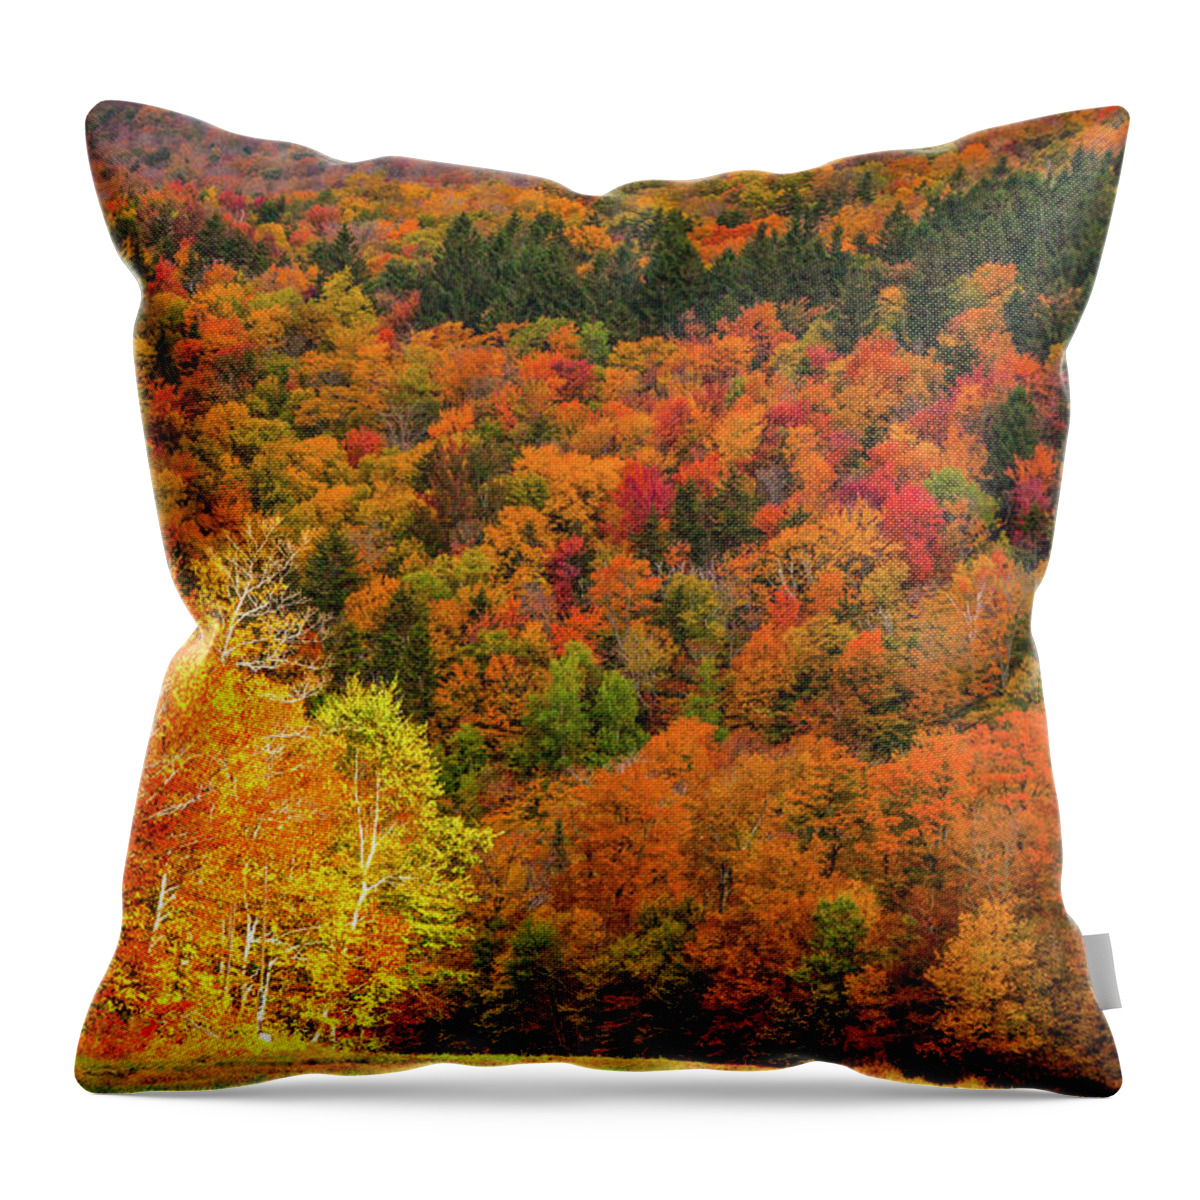 Middlebury Vermont Throw Pillow featuring the photograph Sun peeking through by Jeff Folger